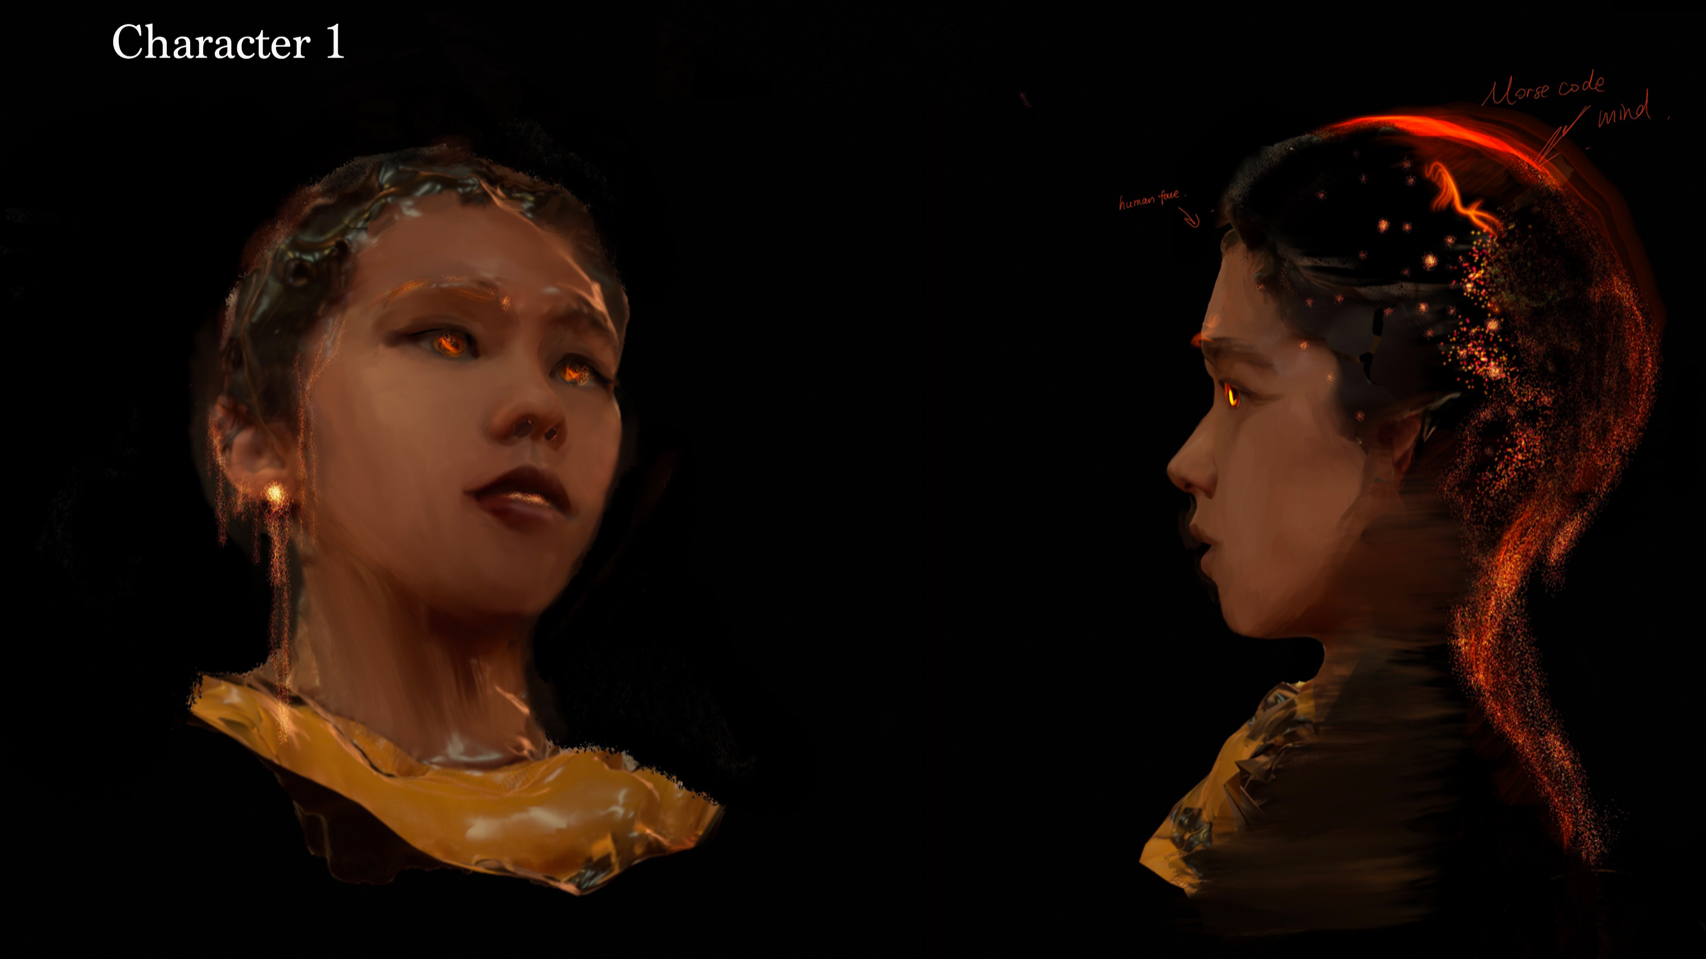 Black background, two computer generated women's heads coated in a liquid substance, soft edges, gold tones and red eyes, 'Character 1' text at top